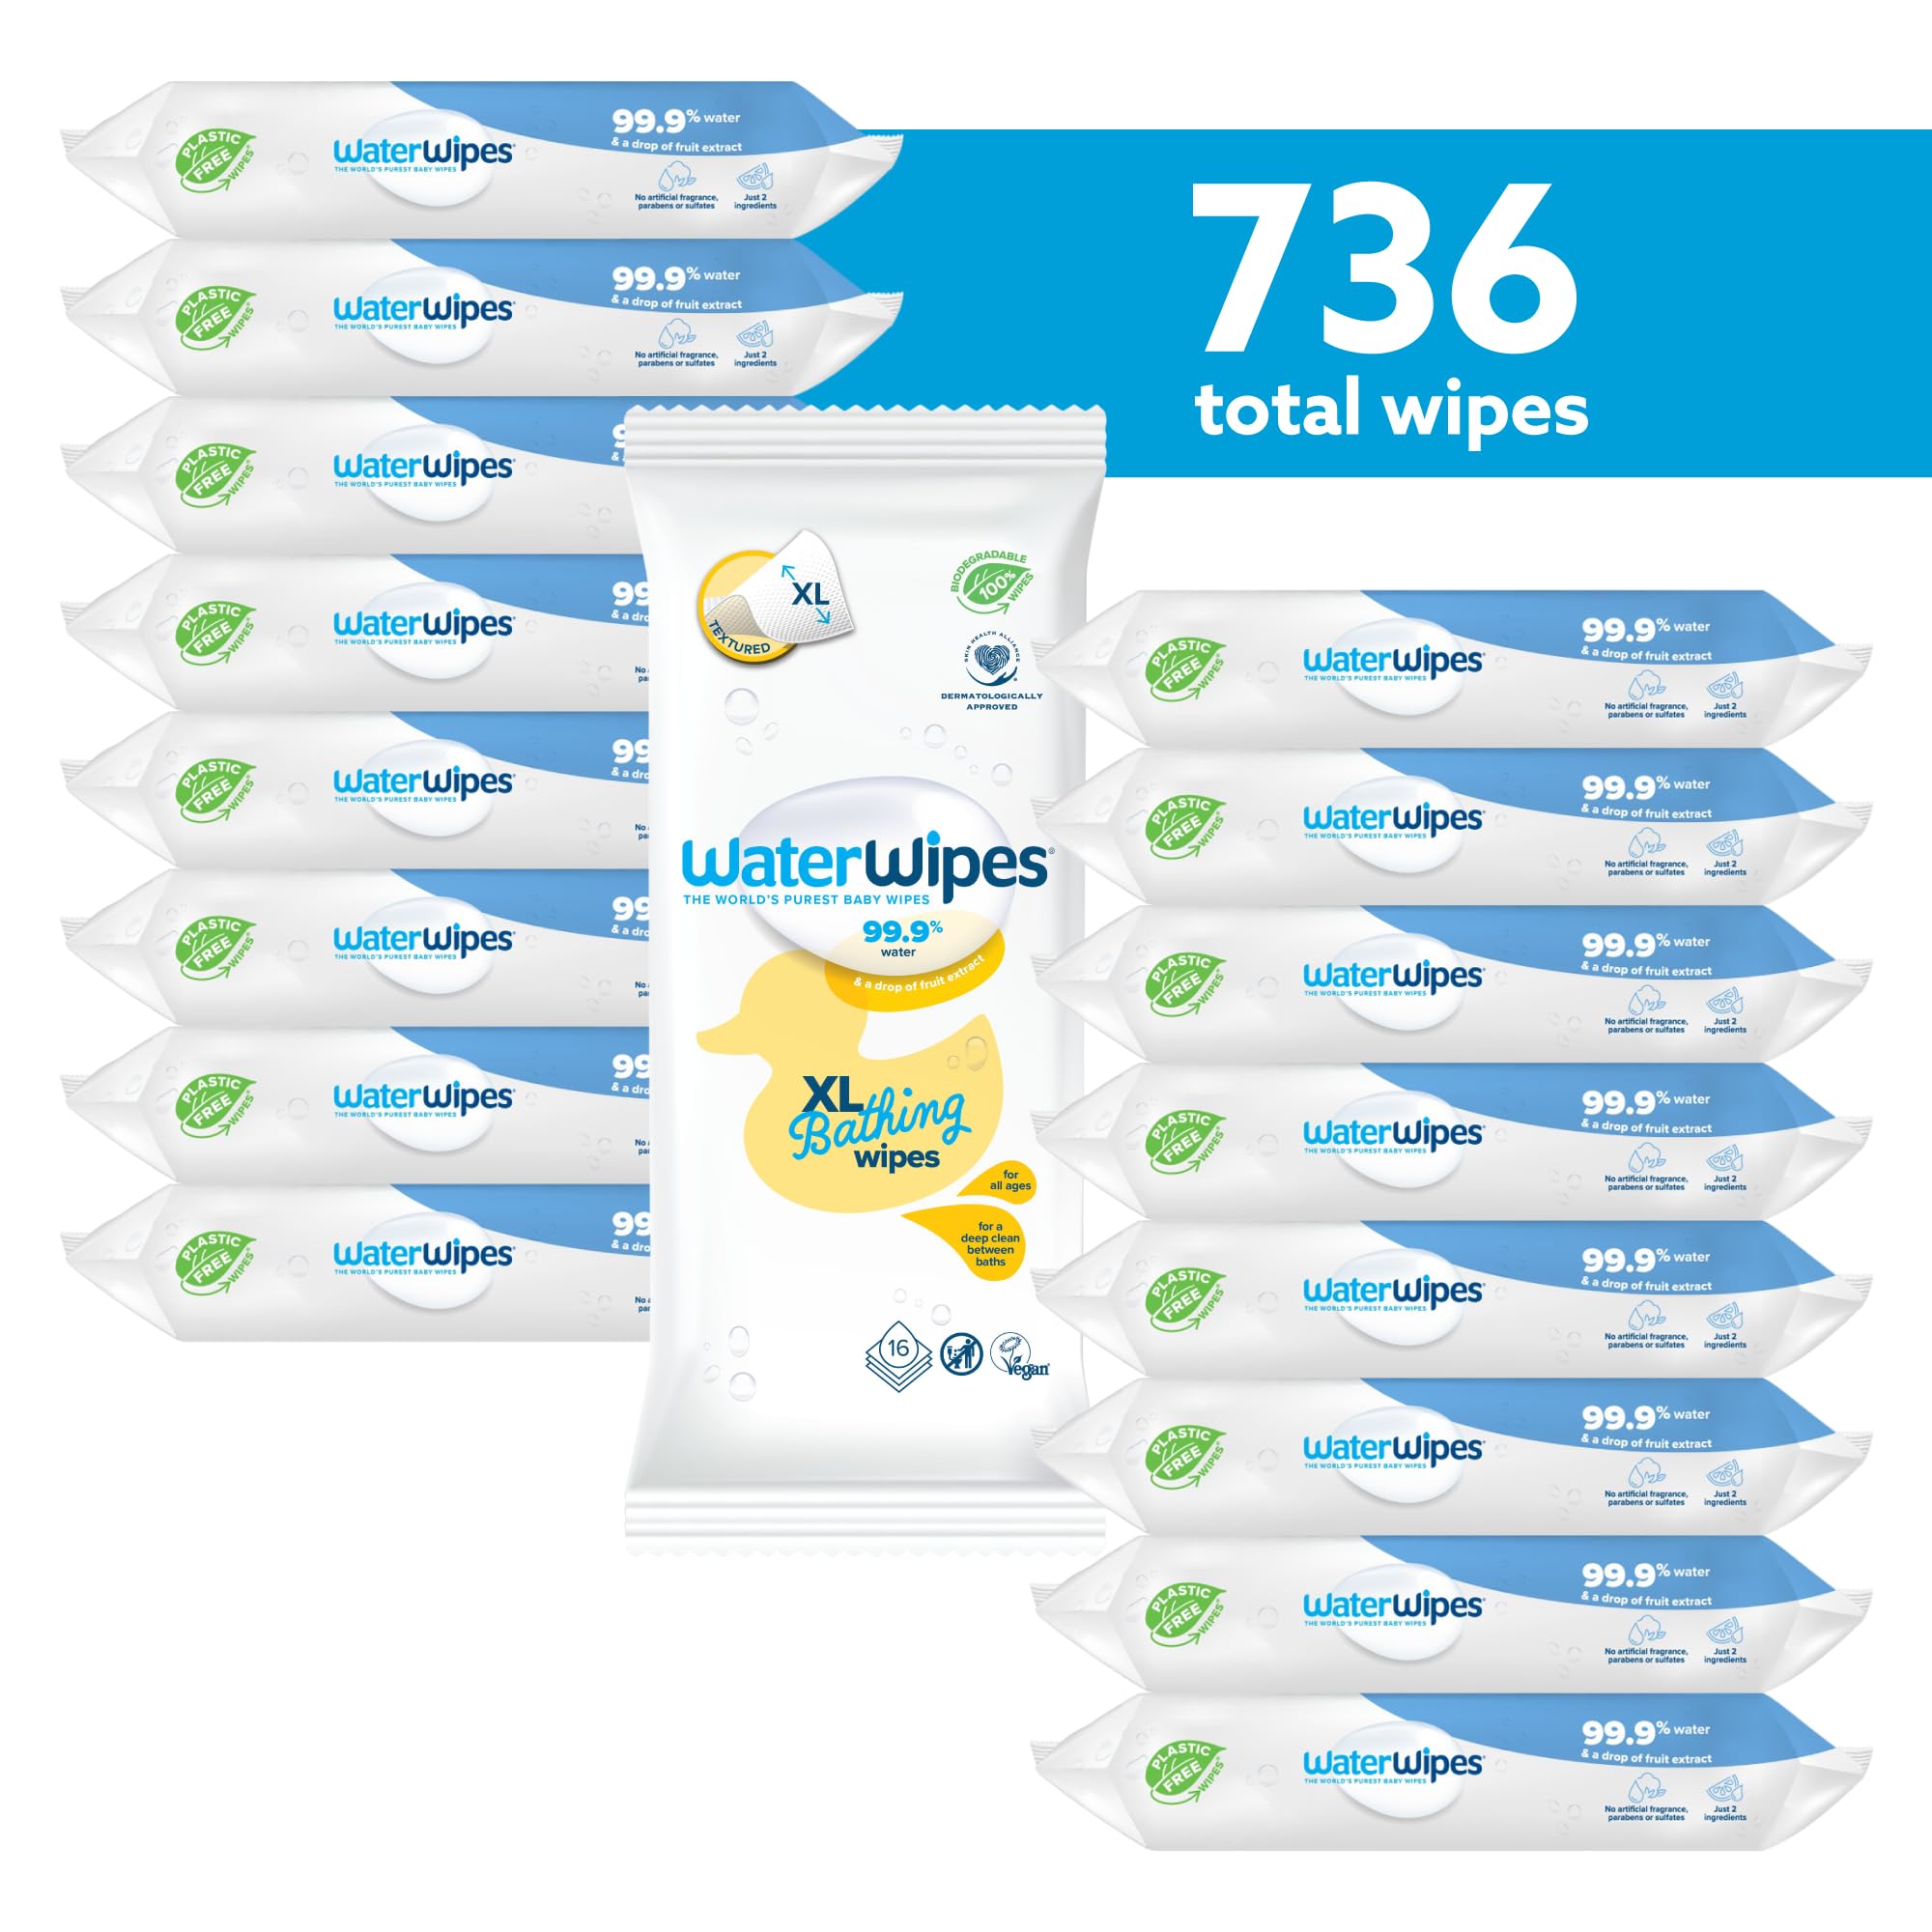 WaterWipes Bundle, Original 720 Count (12 packs) & XL Bathing Wipes 16 Count (1 pack), Plastic-Free, 99.9% Water Based Wipes, Unscented, Hypoallergenic for Sensitive Skin, Packaging May Vary